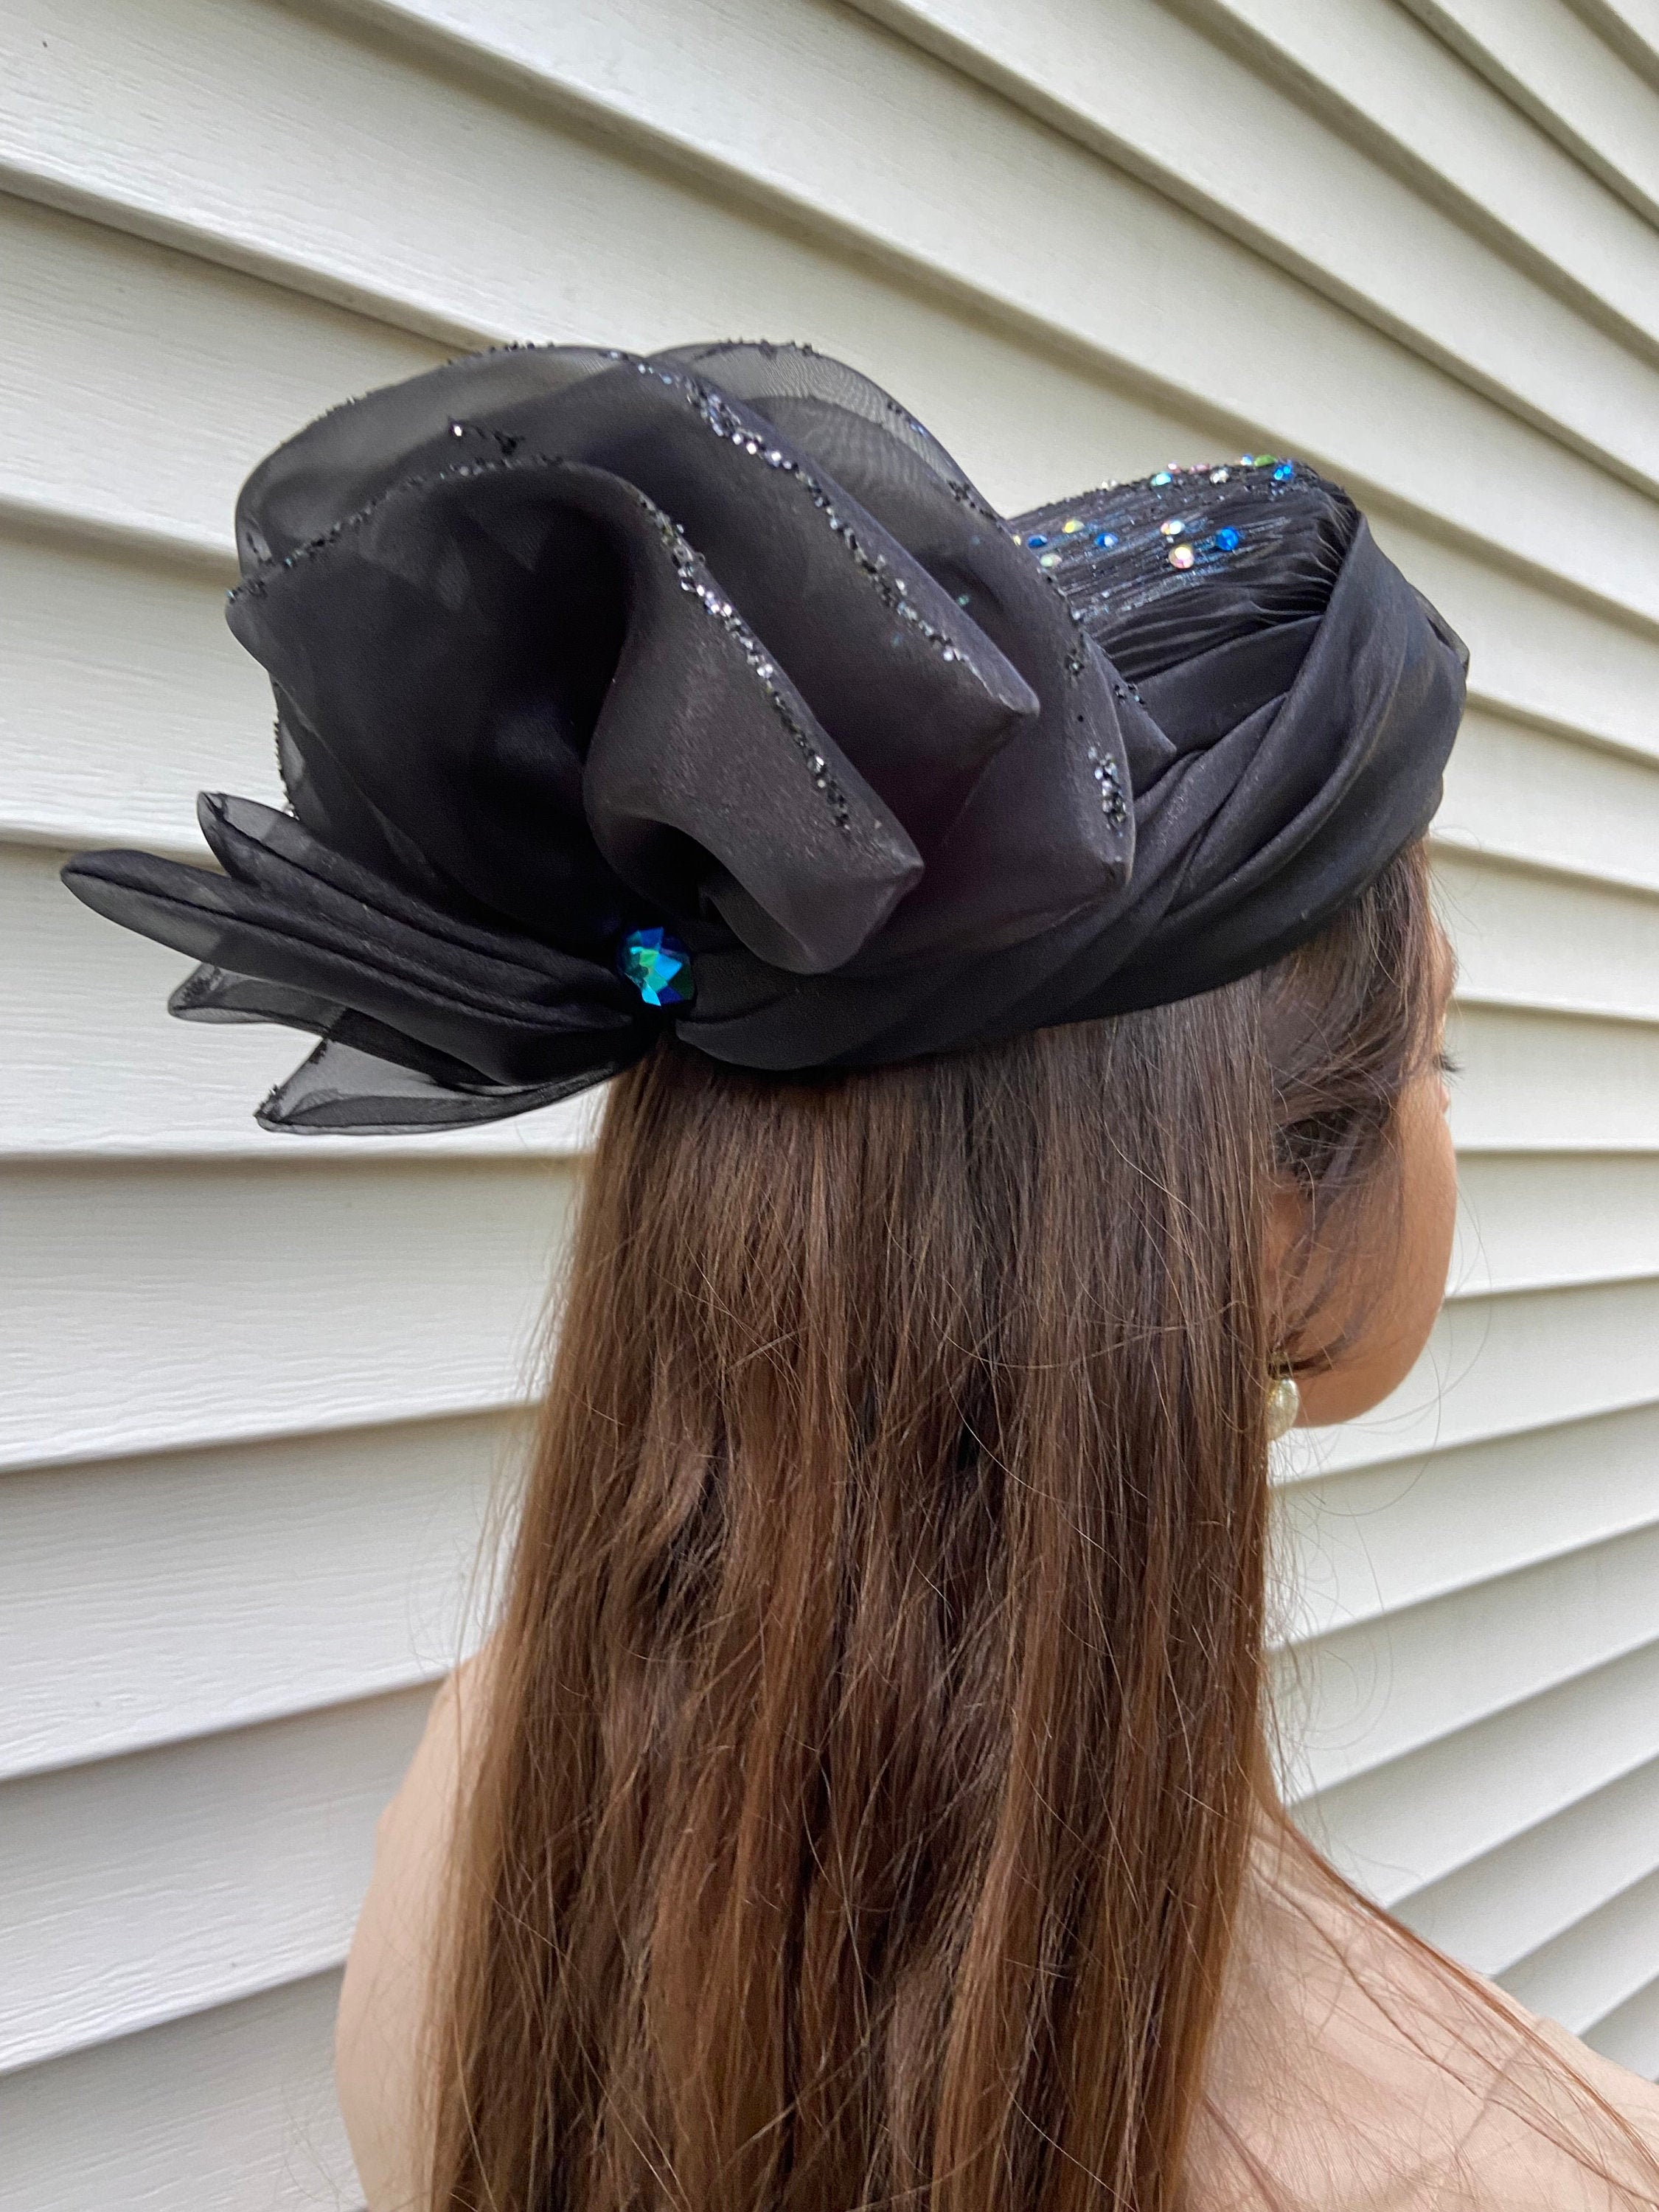 Vintage Black Hat 1950s 1960s Lovely Delicate Dark Color Glamorous Sculptural Mod Funeral Chic Formal Event Party Style Attire